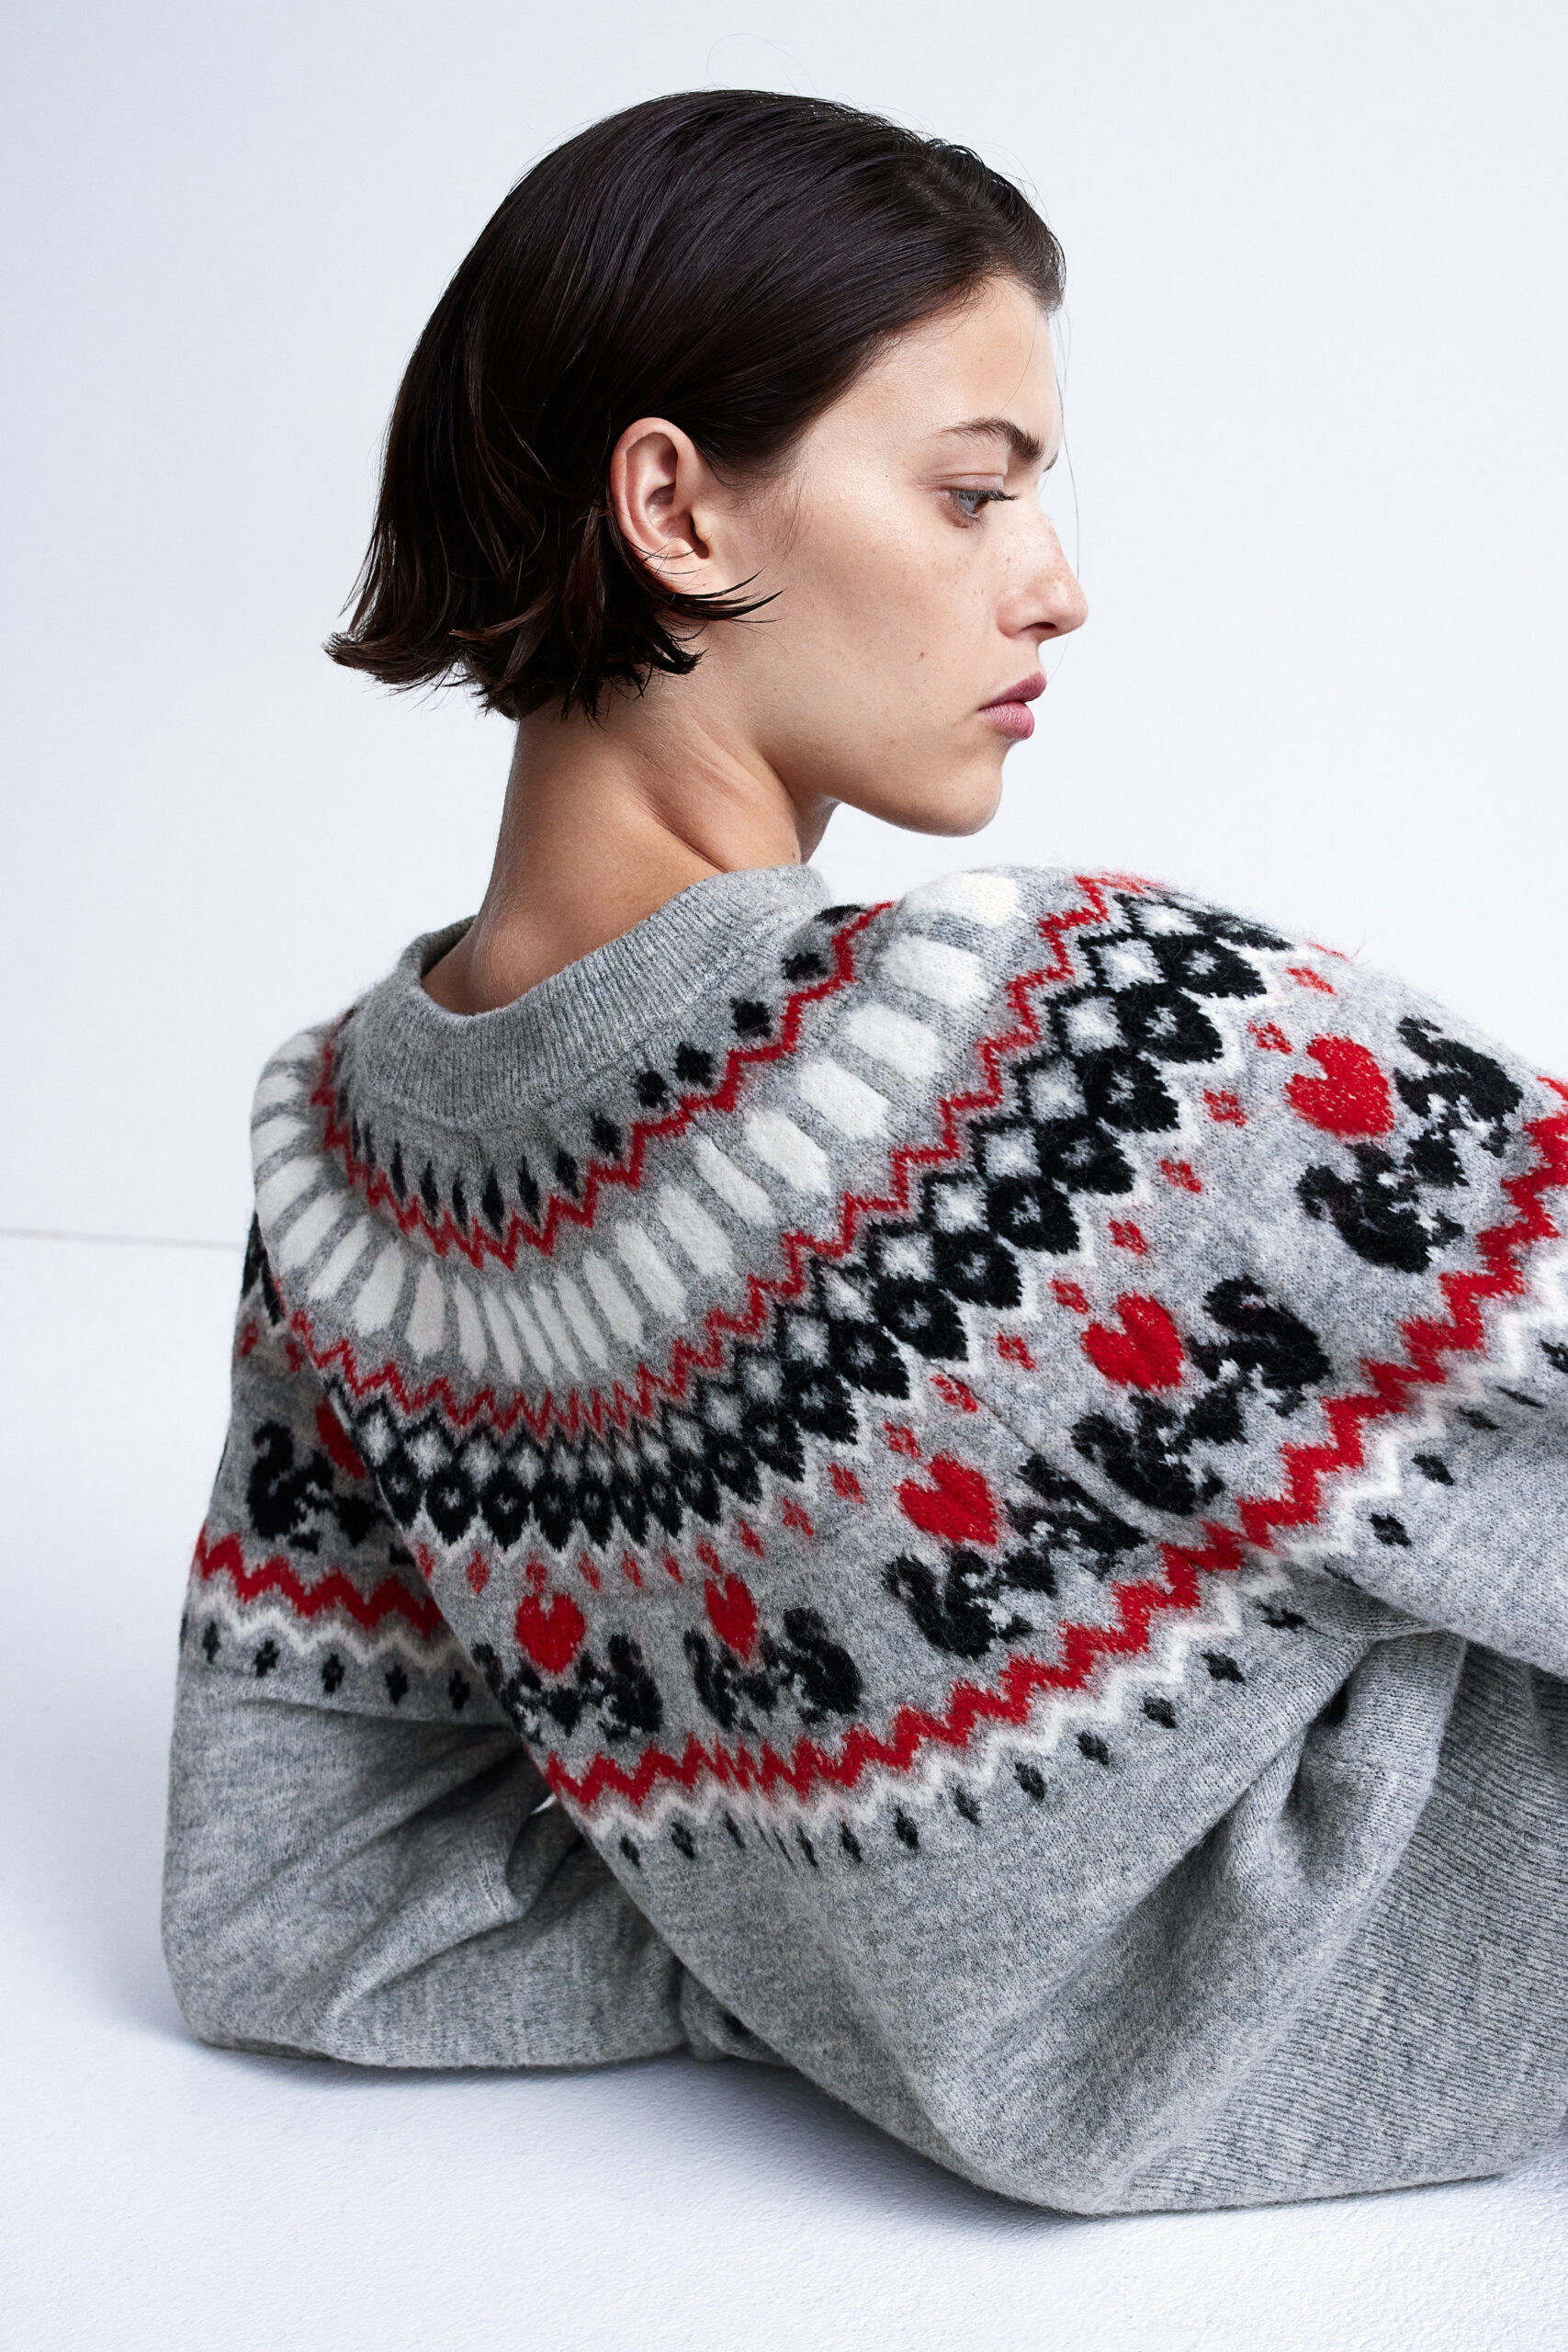 model wearing grey jacquard-knit sweater with red, white and black patterns